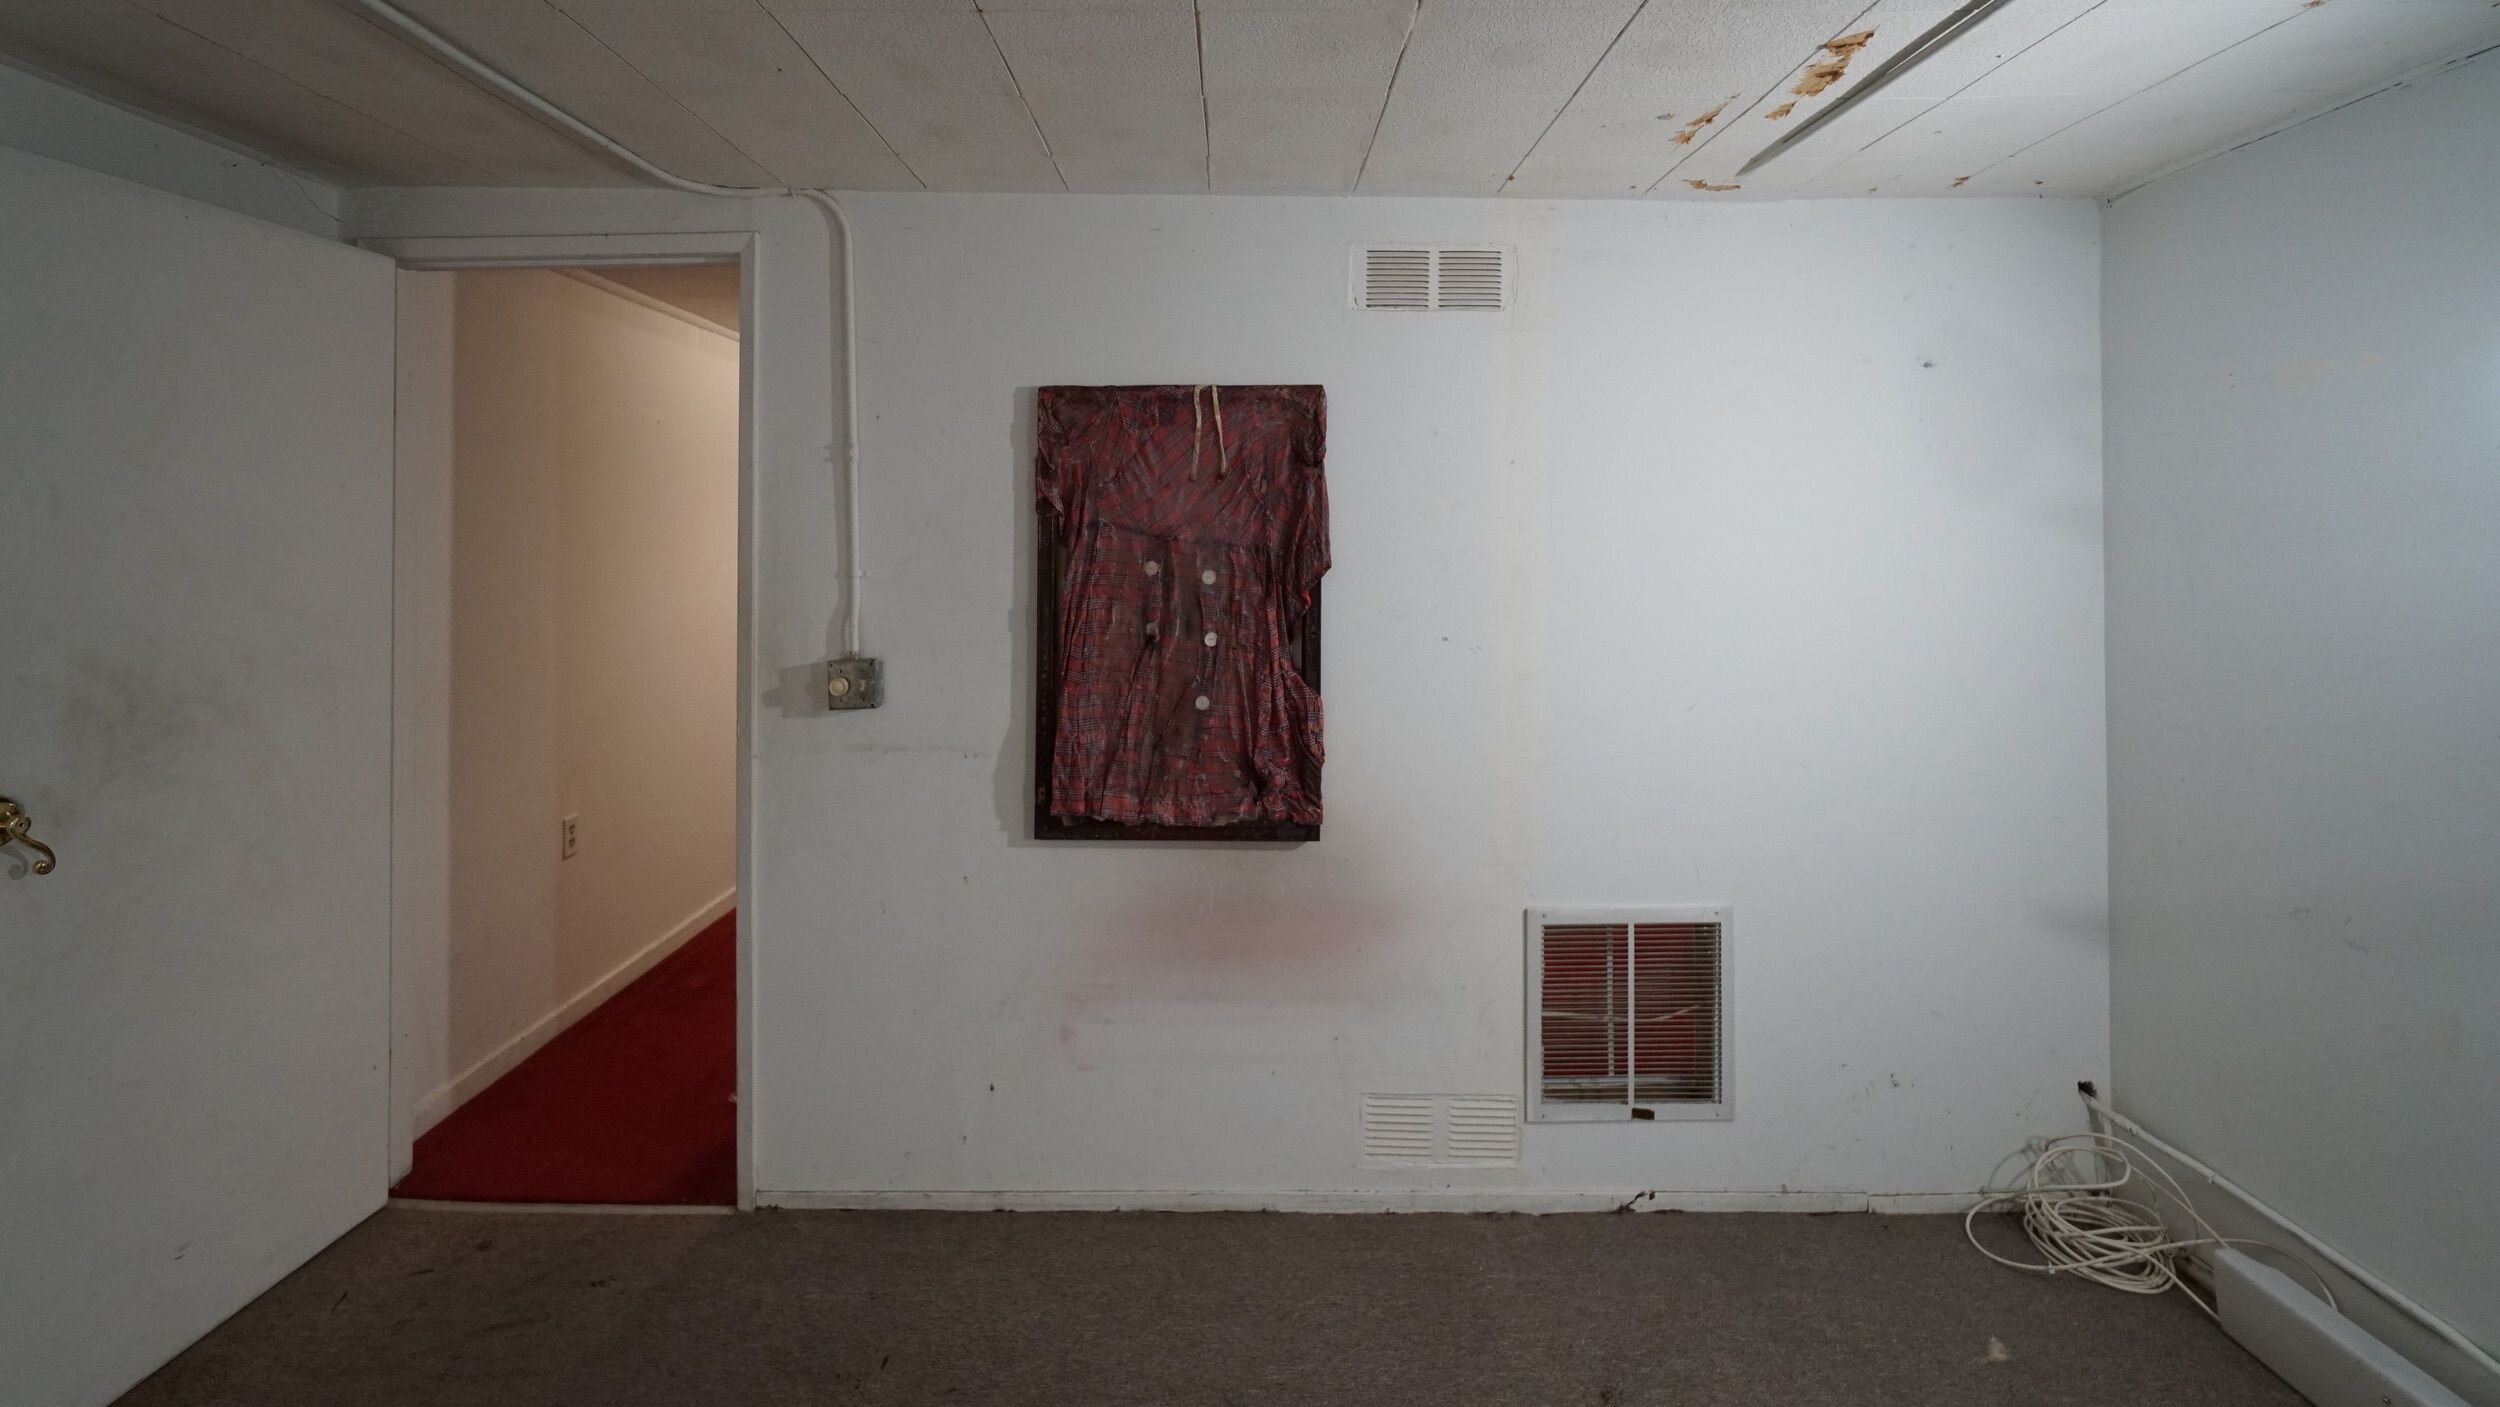  Bri Williams - Installation view    Them dogs that don’t tell , 2018 Dress, soap, cabinet door frame 24 x 17 x 1 1/2 in 61 x 43.2 x 3.8 cm 